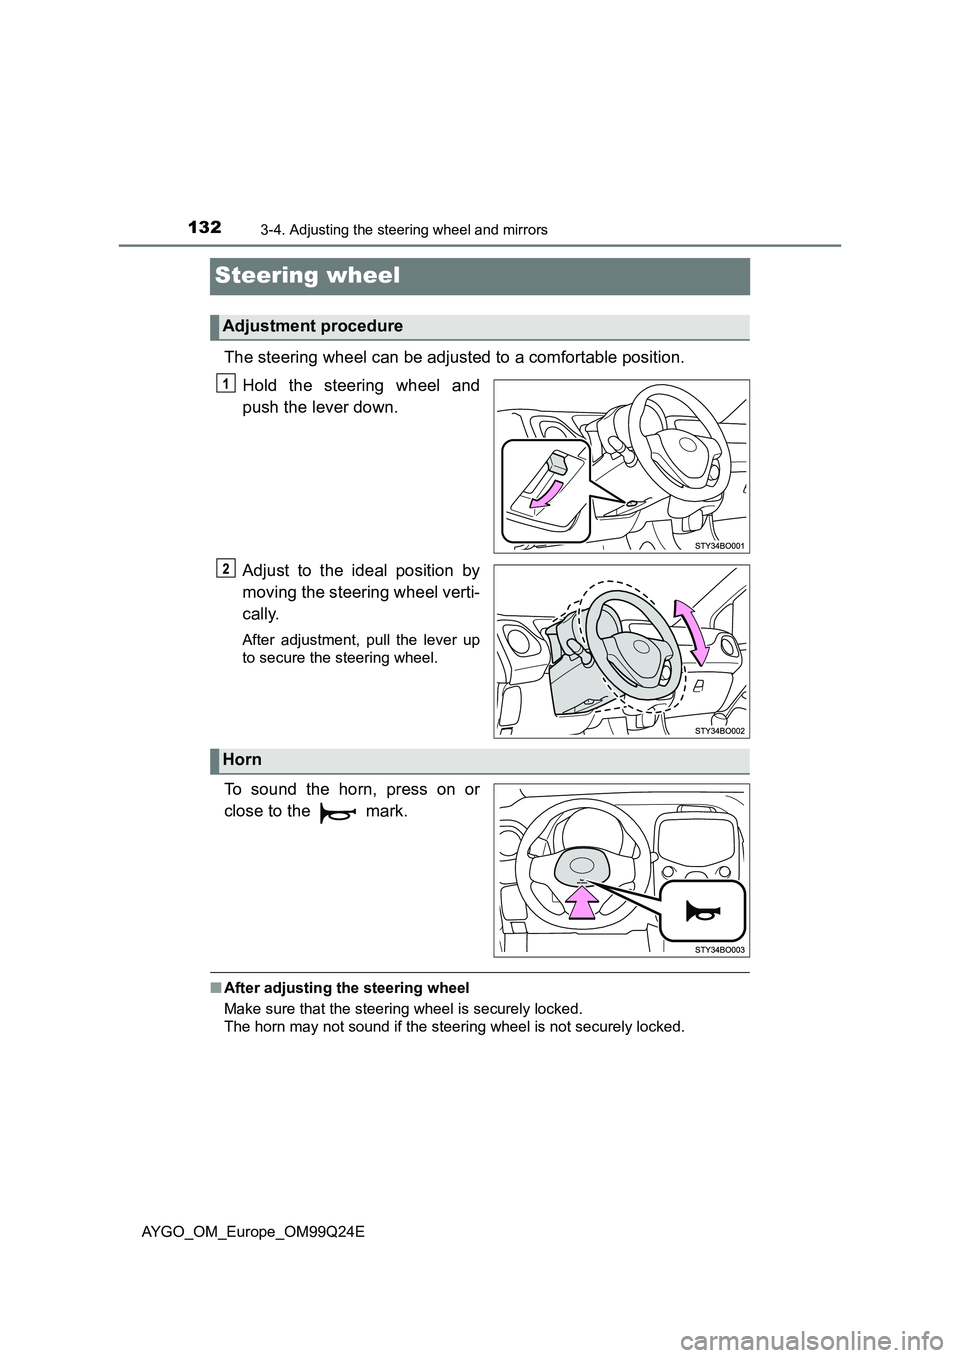 TOYOTA AYGO 2017  Owners Manual (in English) 1323-4. Adjusting the steering wheel and mirrors
AYGO_OM_Europe_OM99Q24E
Steering wheel
The steering wheel can be adjusted to a comfortable position. 
Hold the steering wheel and 
push the lever down.